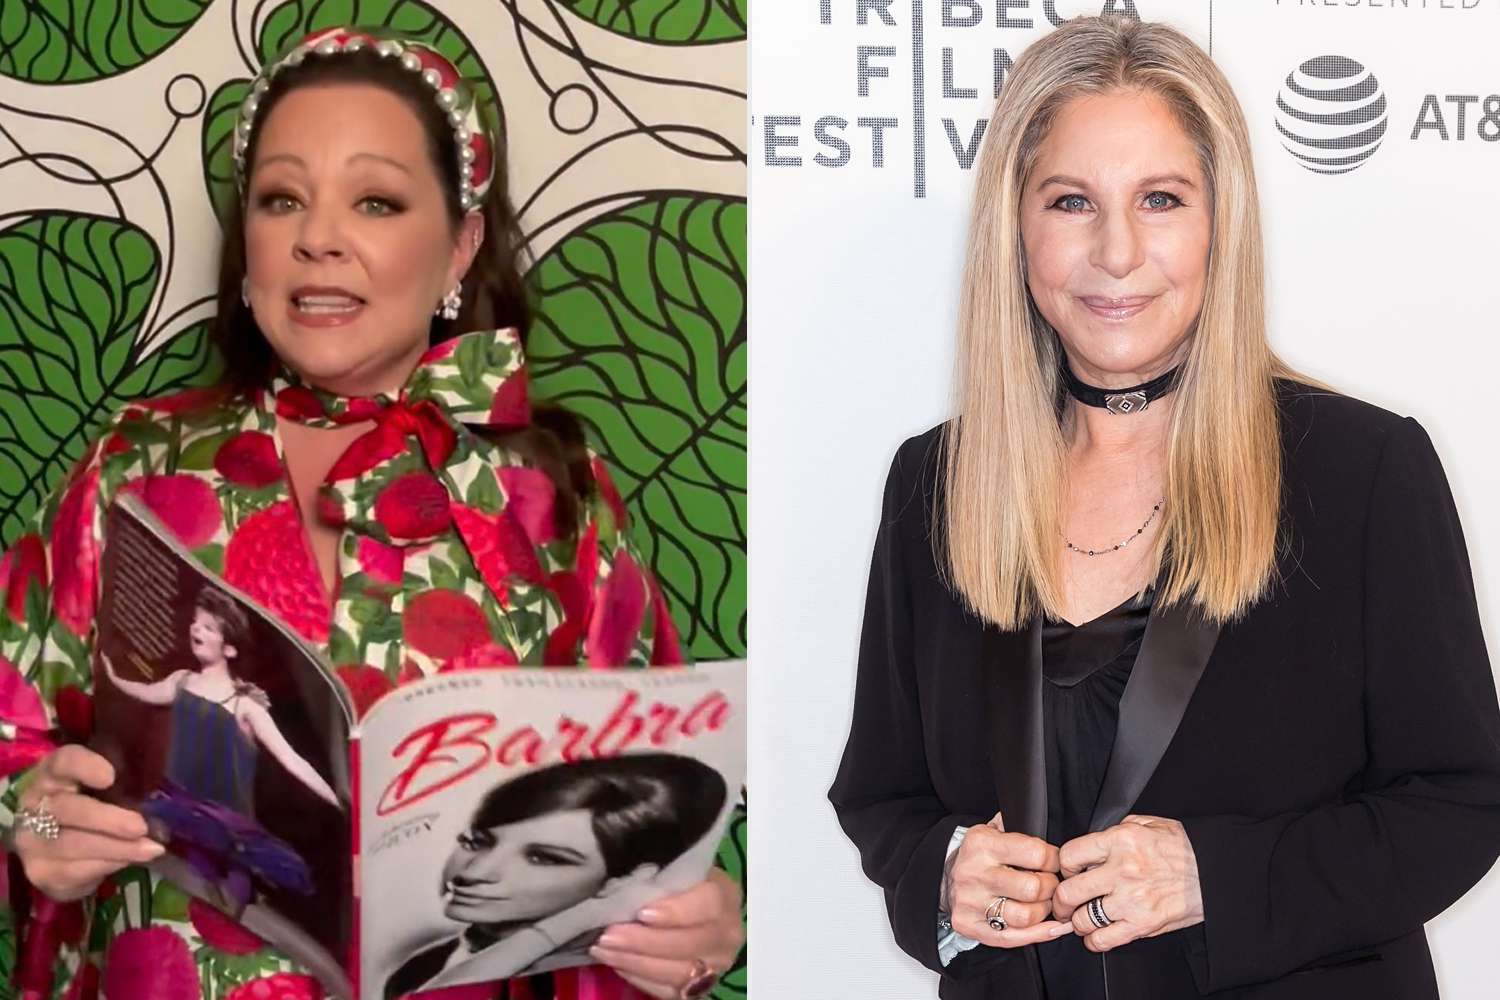 Melissa McCarthy on Barbra Streisand's Ozempic Comment: 'She Thought I Looked Good. I Win the Day'